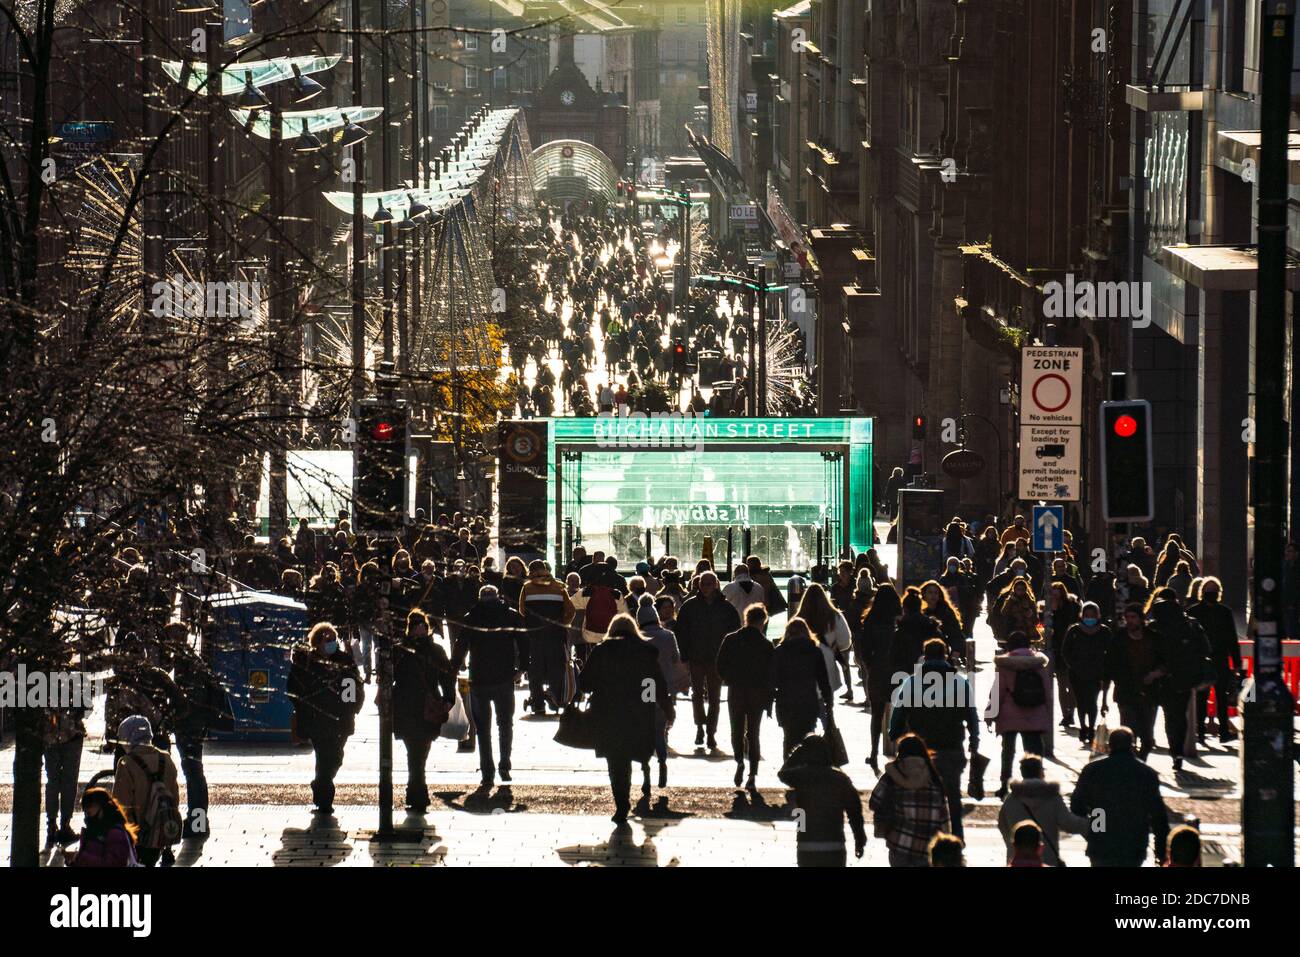 Glasgow, Scotland, UK. 19 November 2020. On the day before the highest level 4 lockdown is imposed on west and central Scotland, shops in Glasgow city centre and streets are busy with members of the public. Pictured; Crowds of shoppers in afternoon sunshine on Buchanan Street.  Iain Masterton/Alamy Live News Stock Photo